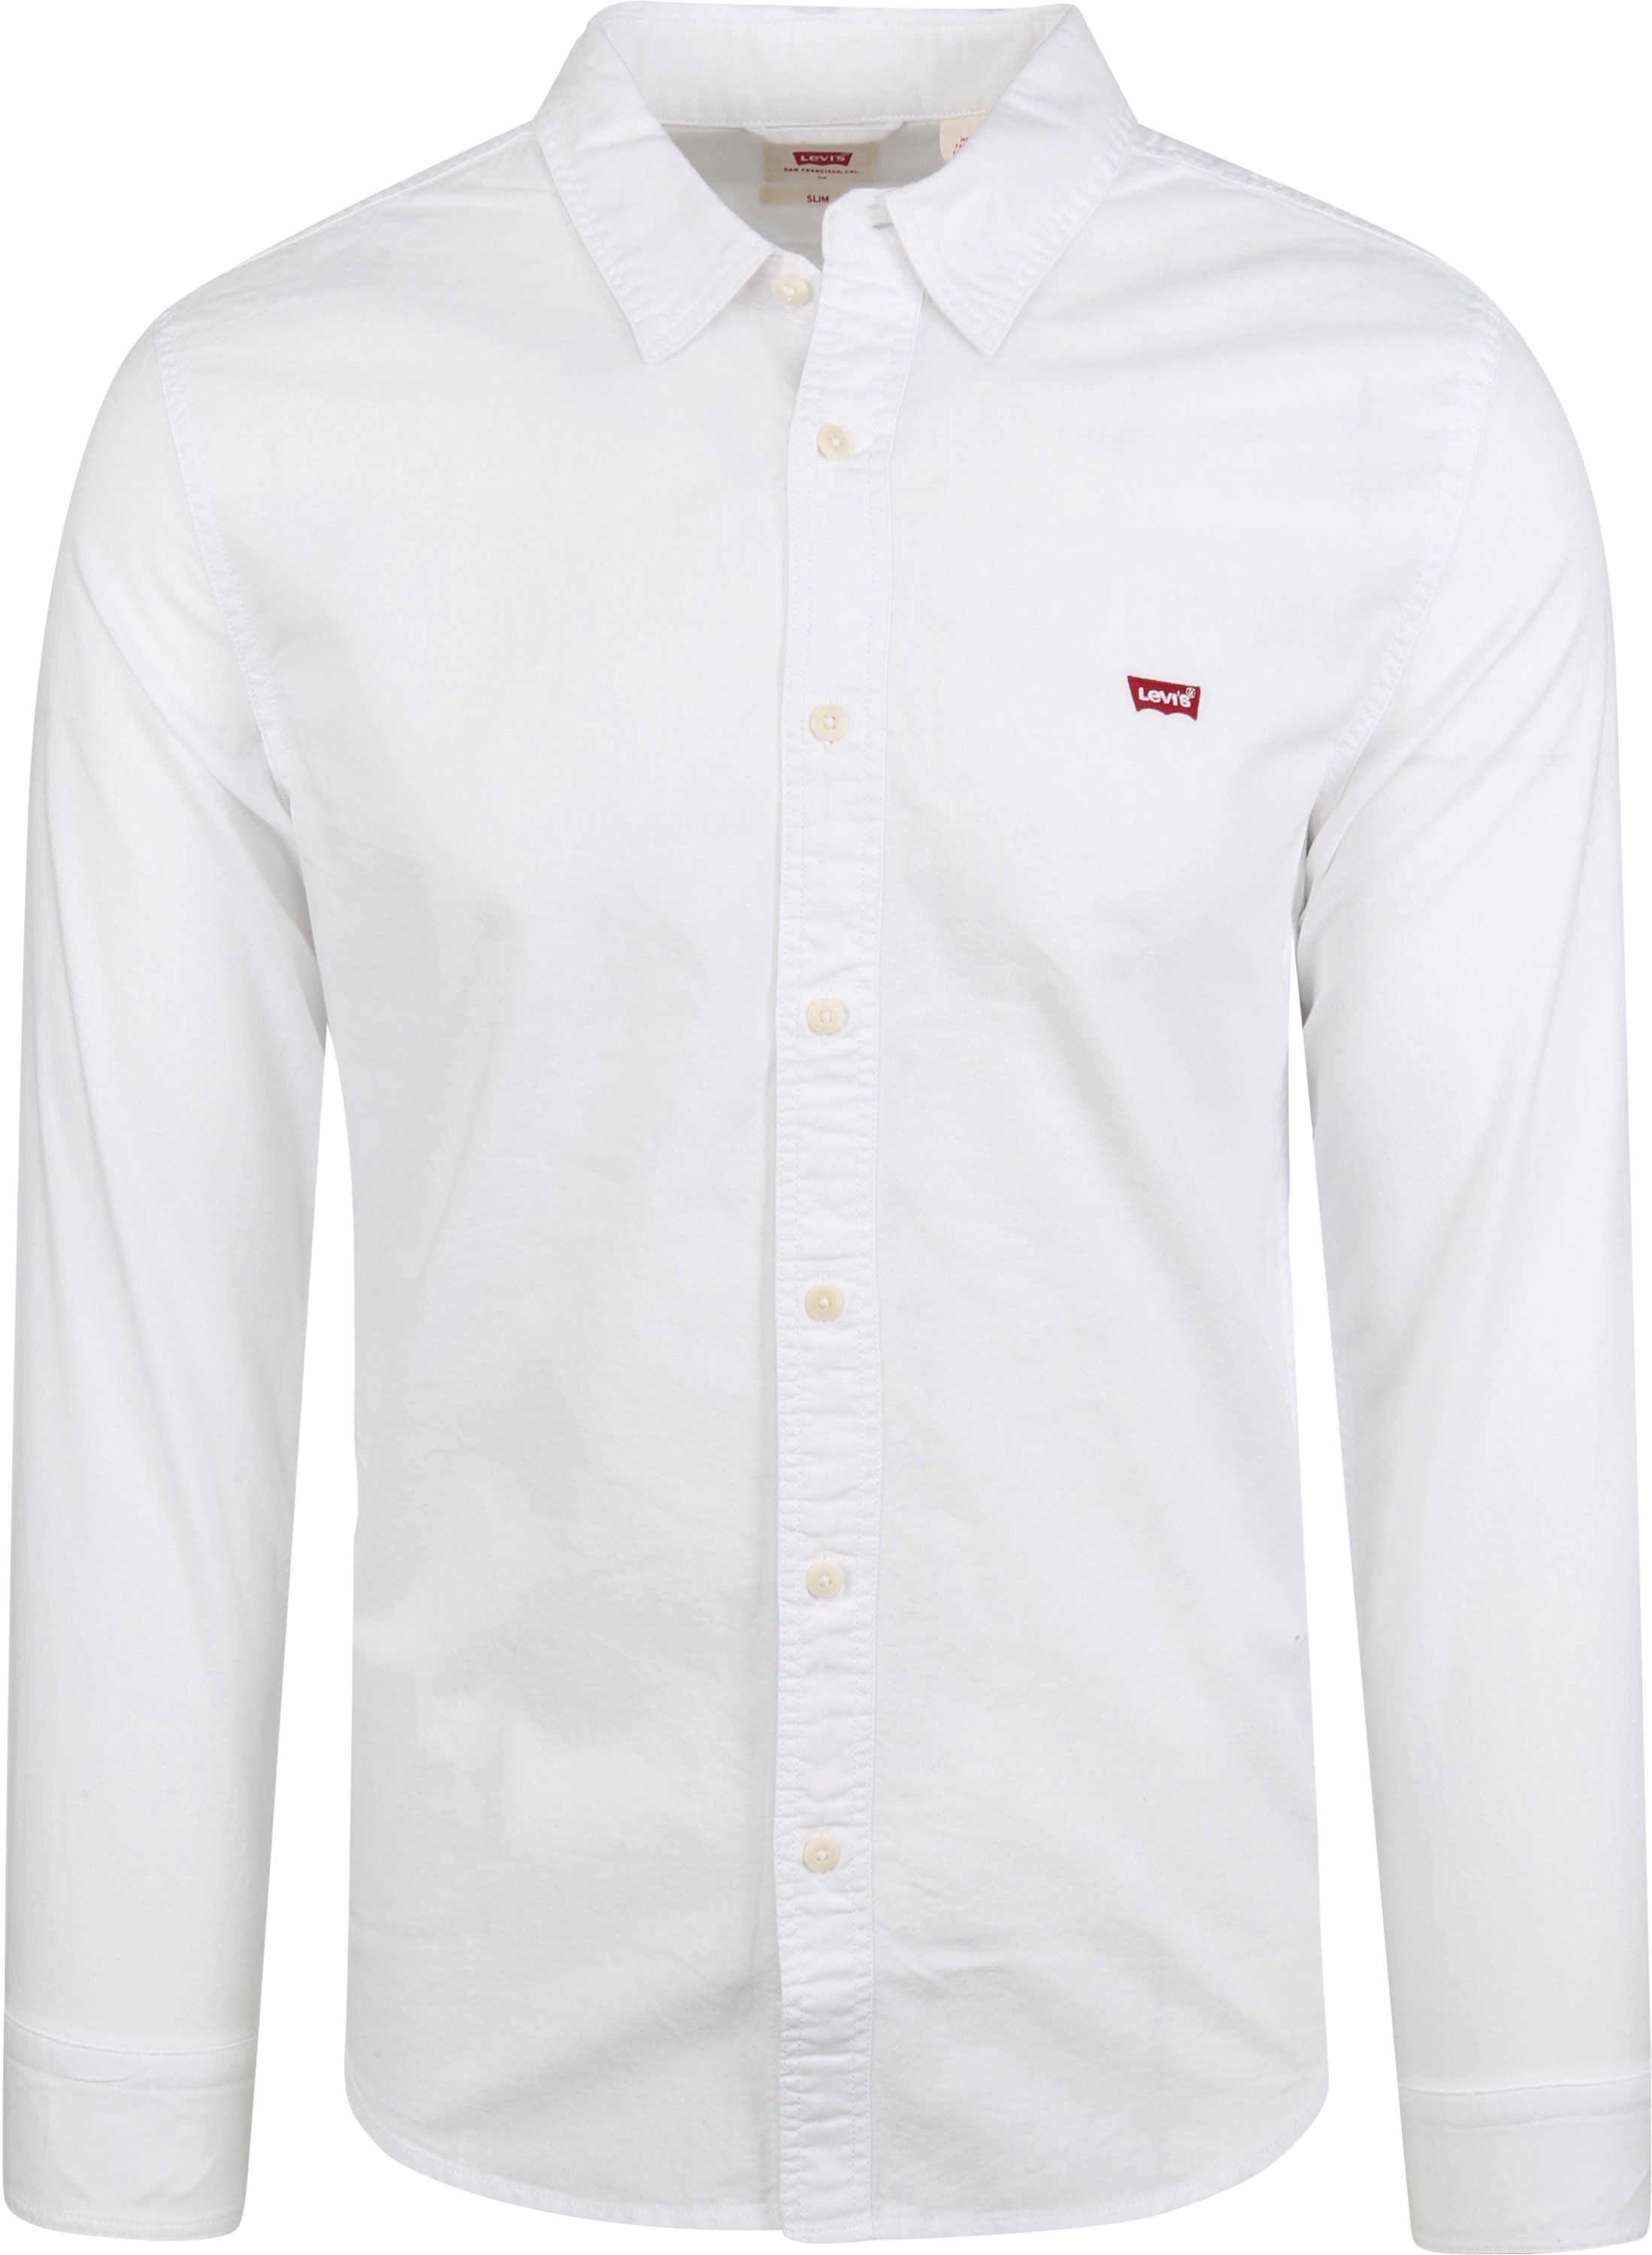 Levi's Chemise Battery Blanche Blanc taille L